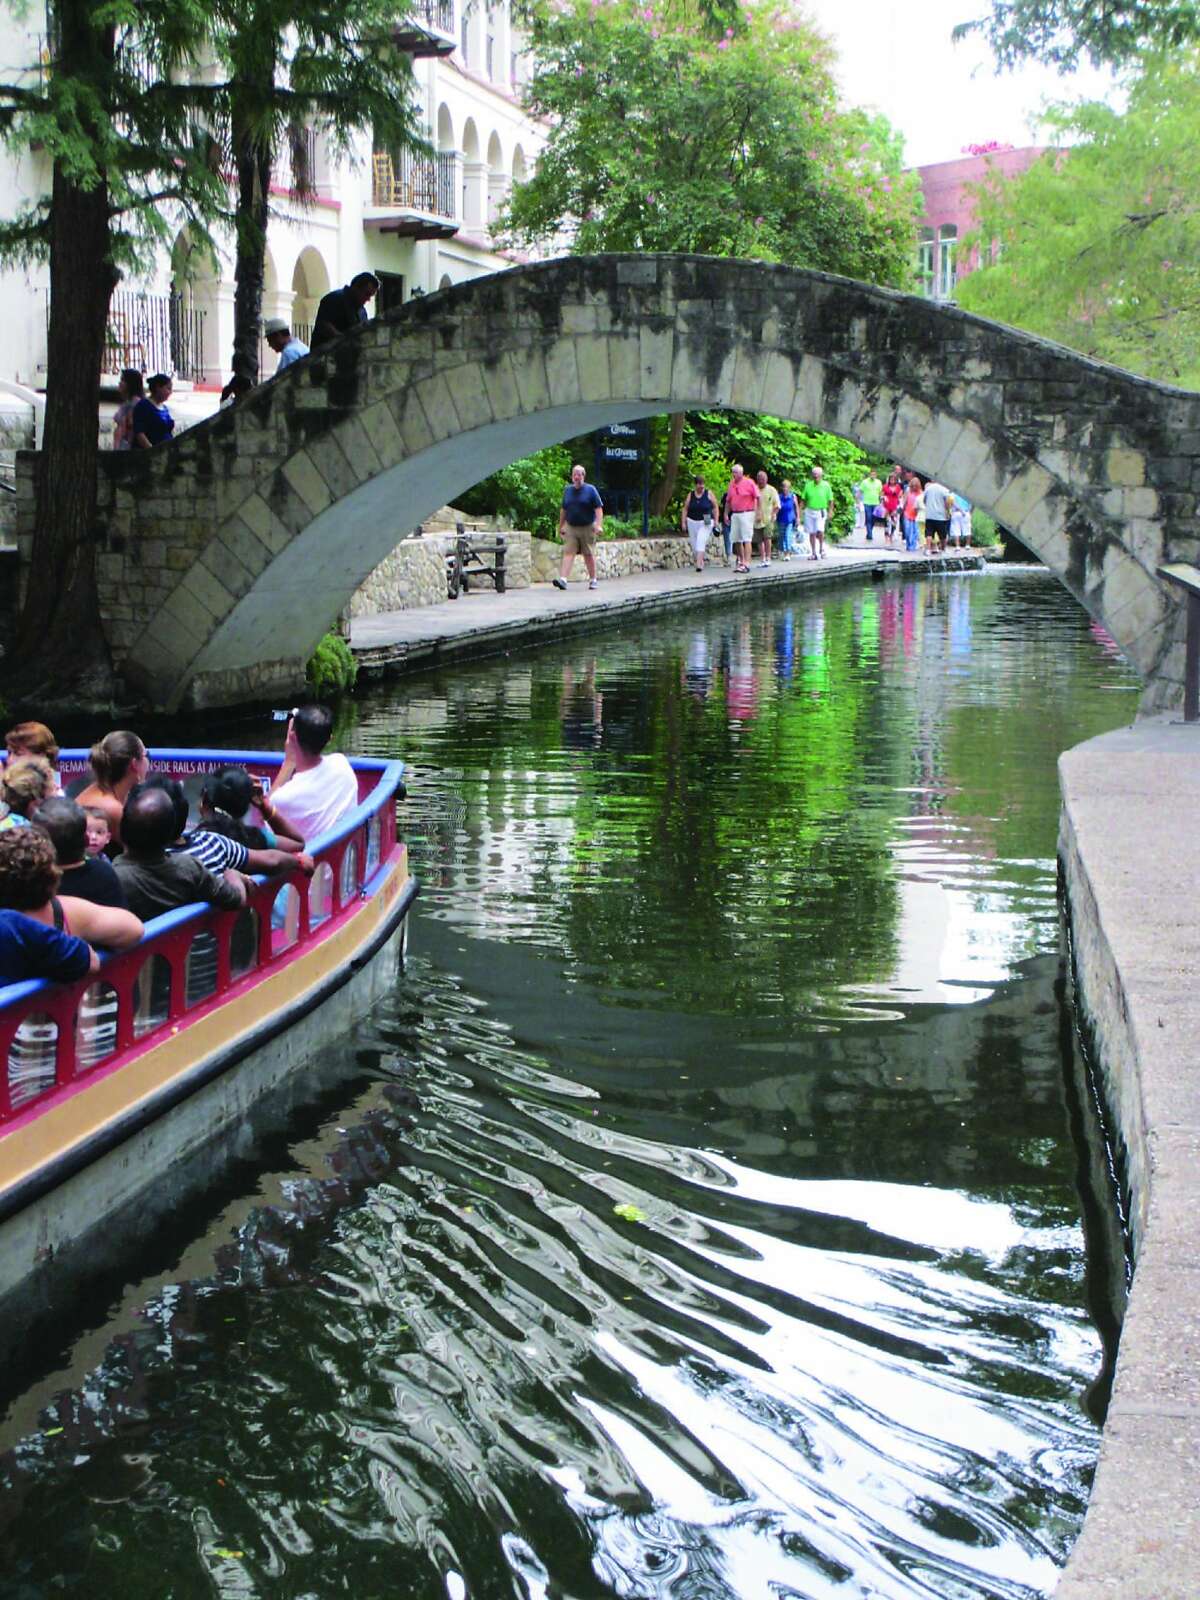 Take your baby to the Riverwalk... It's easily one of the most popular tourist destinations in the state and makes for a romantic stroll, especially in the winter when the trees are lighted.